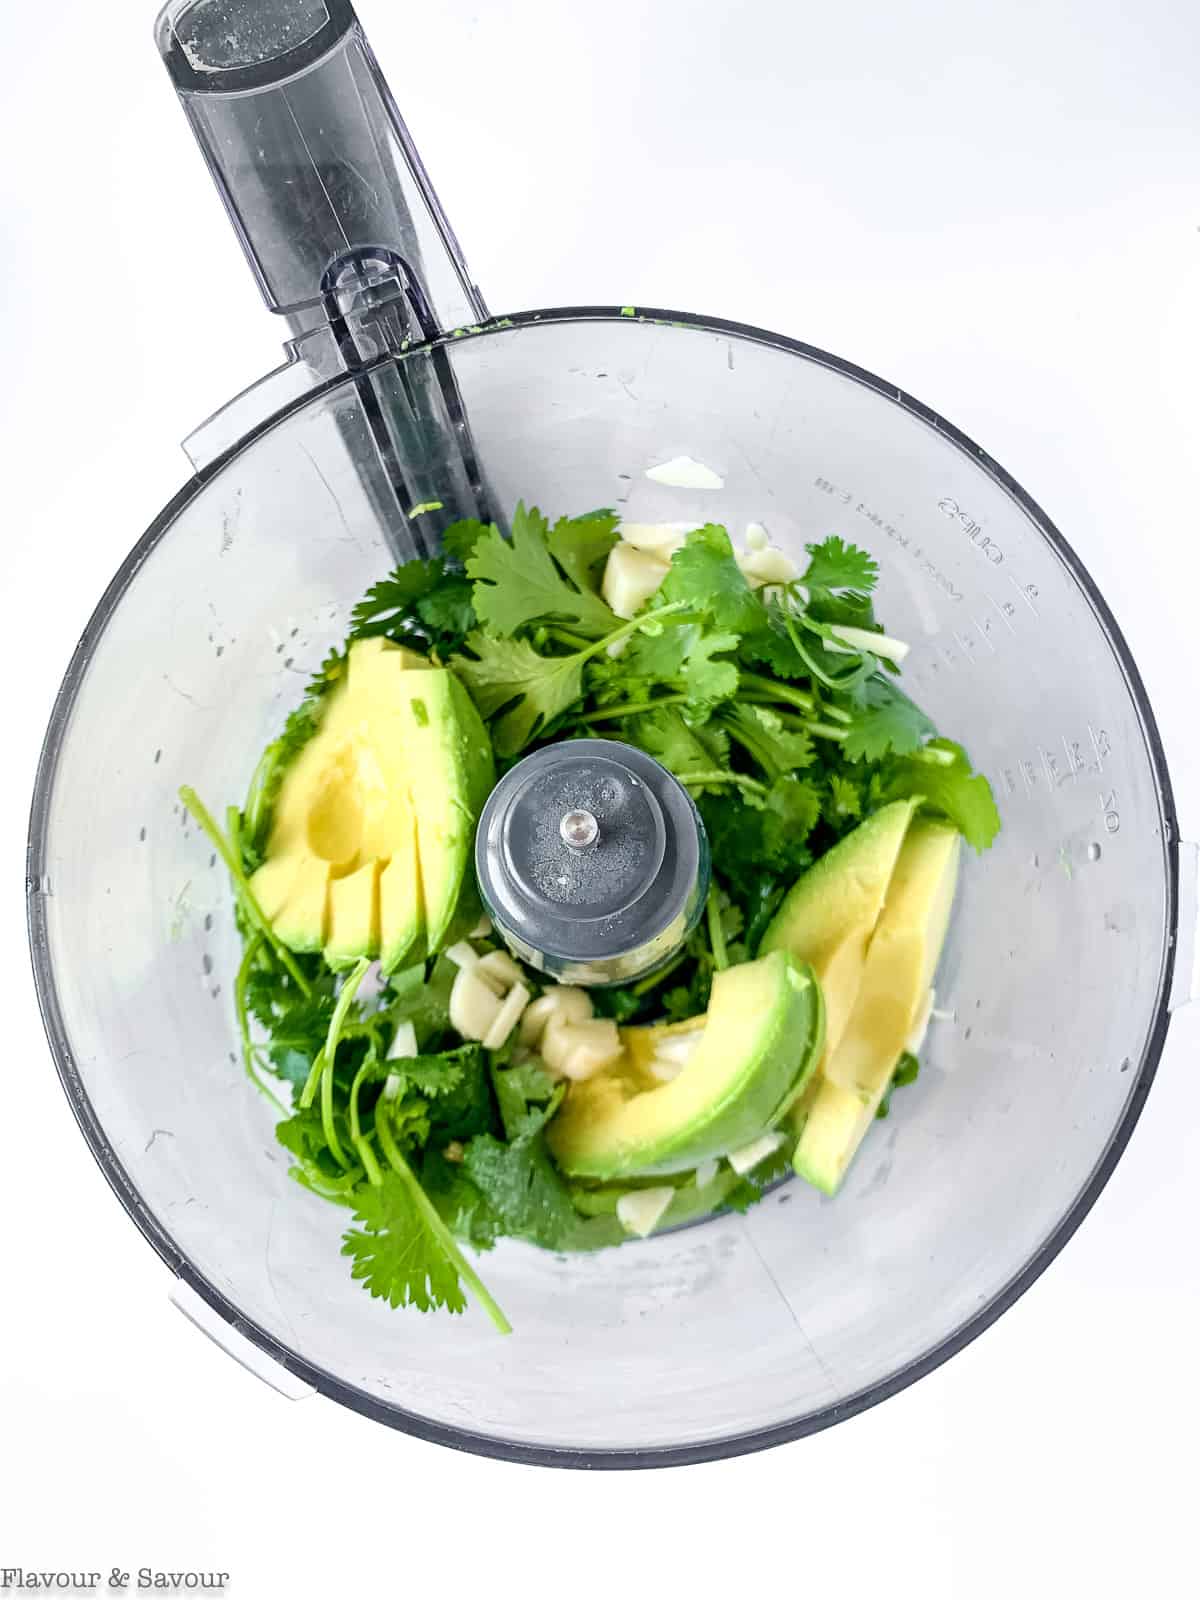 Avocado cream ingredients in the bowl of a food processor.